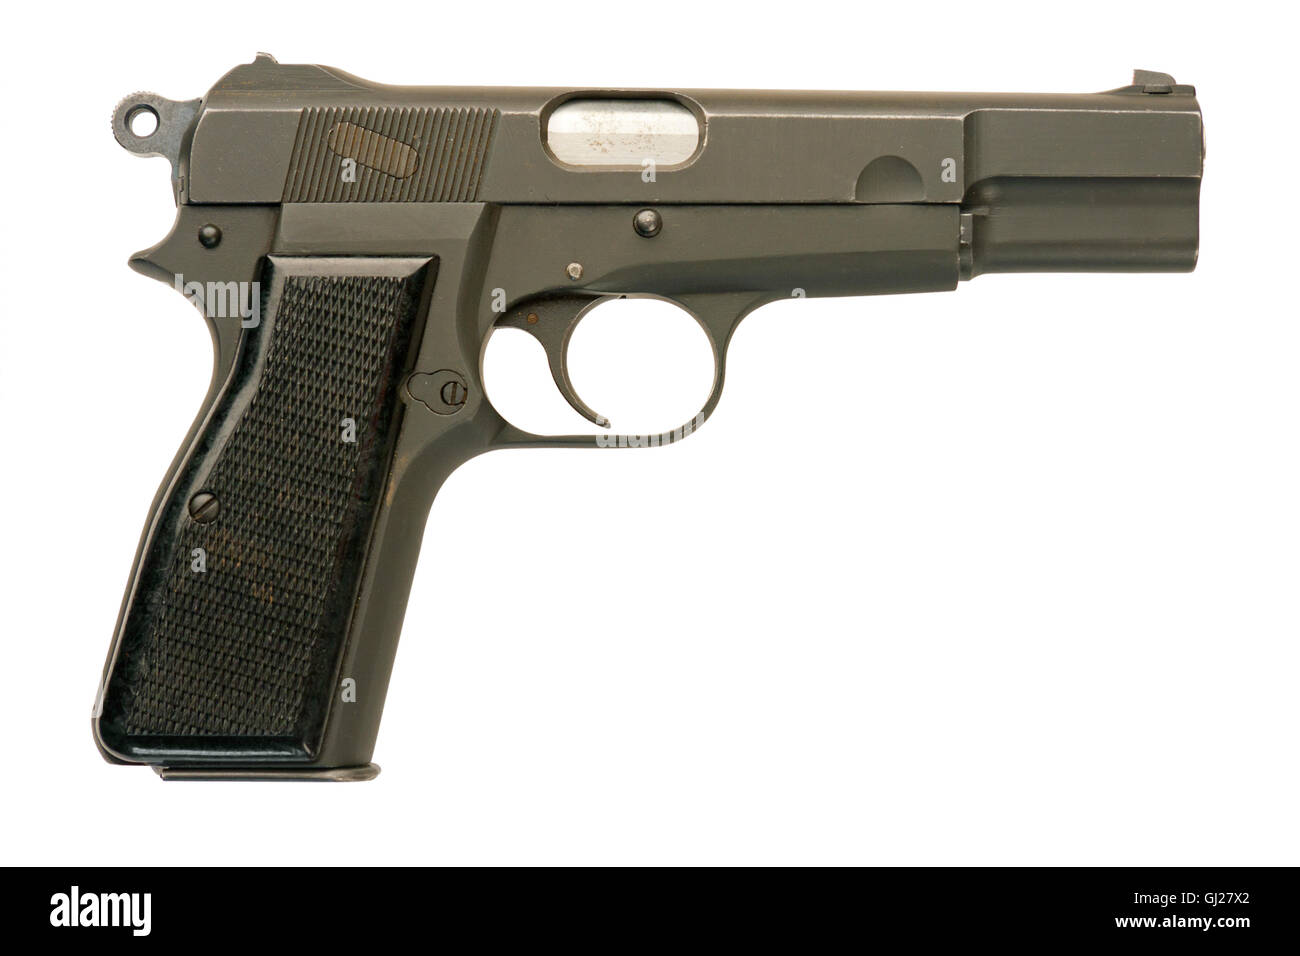 A Canadian-made 9mm semi-automatic military pistol. Approximately 150,000 were manufactured by John Inglis in Toronto. Stock Photo